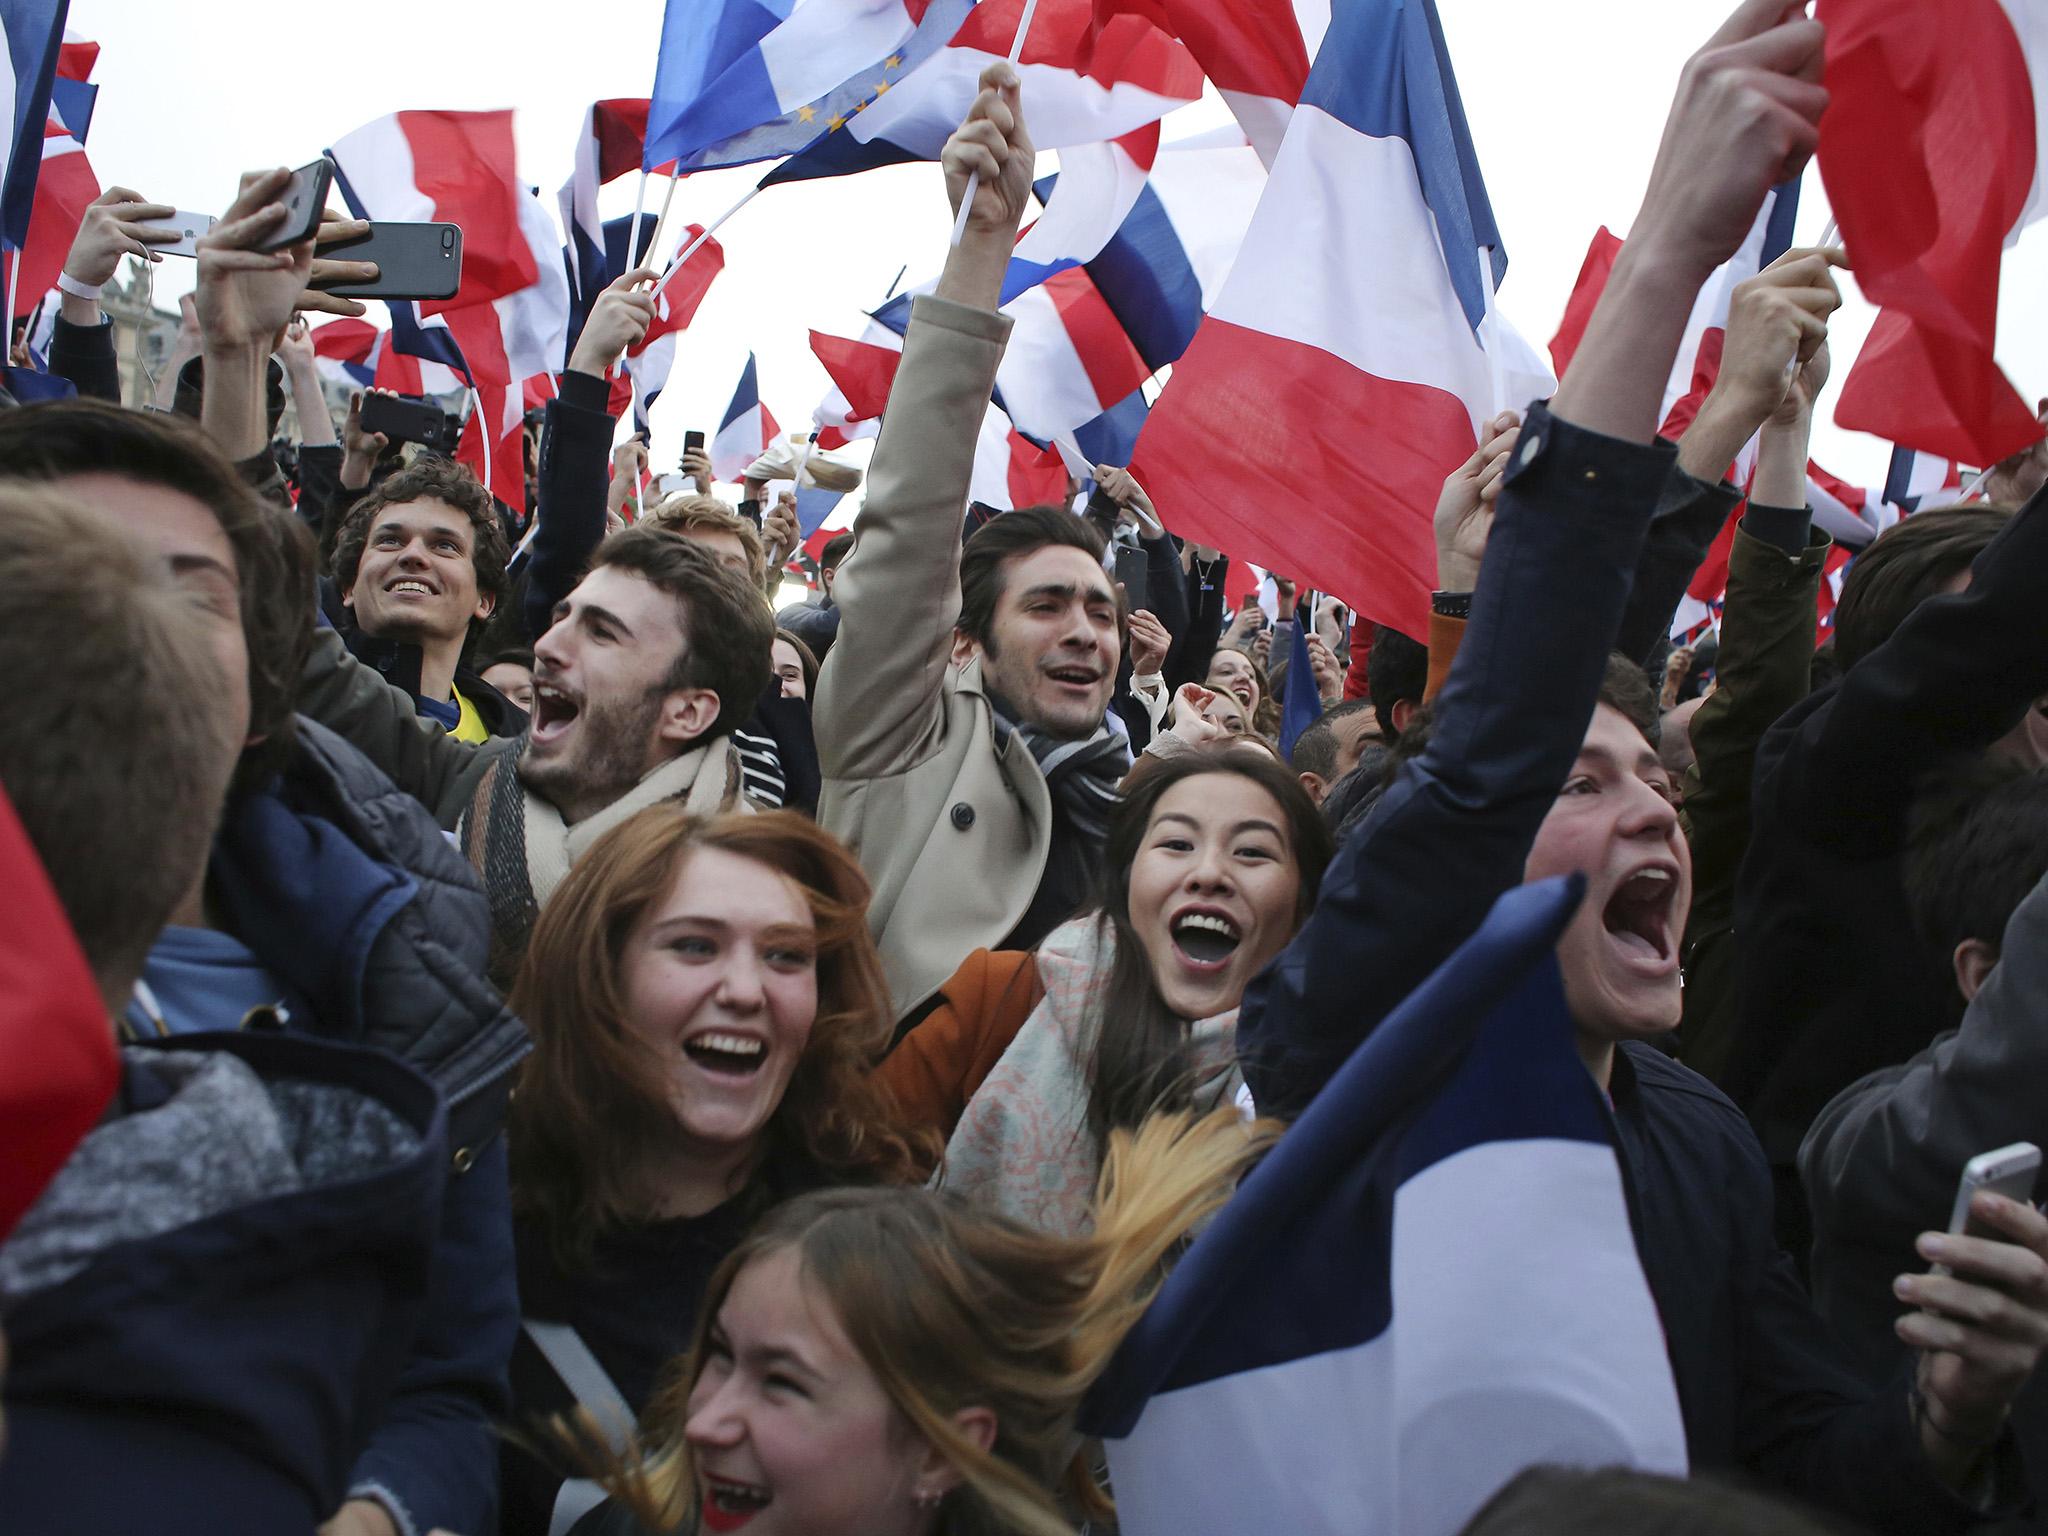 Supporters of Mr Macron celebrate outside the Louvre museum in Paris, France